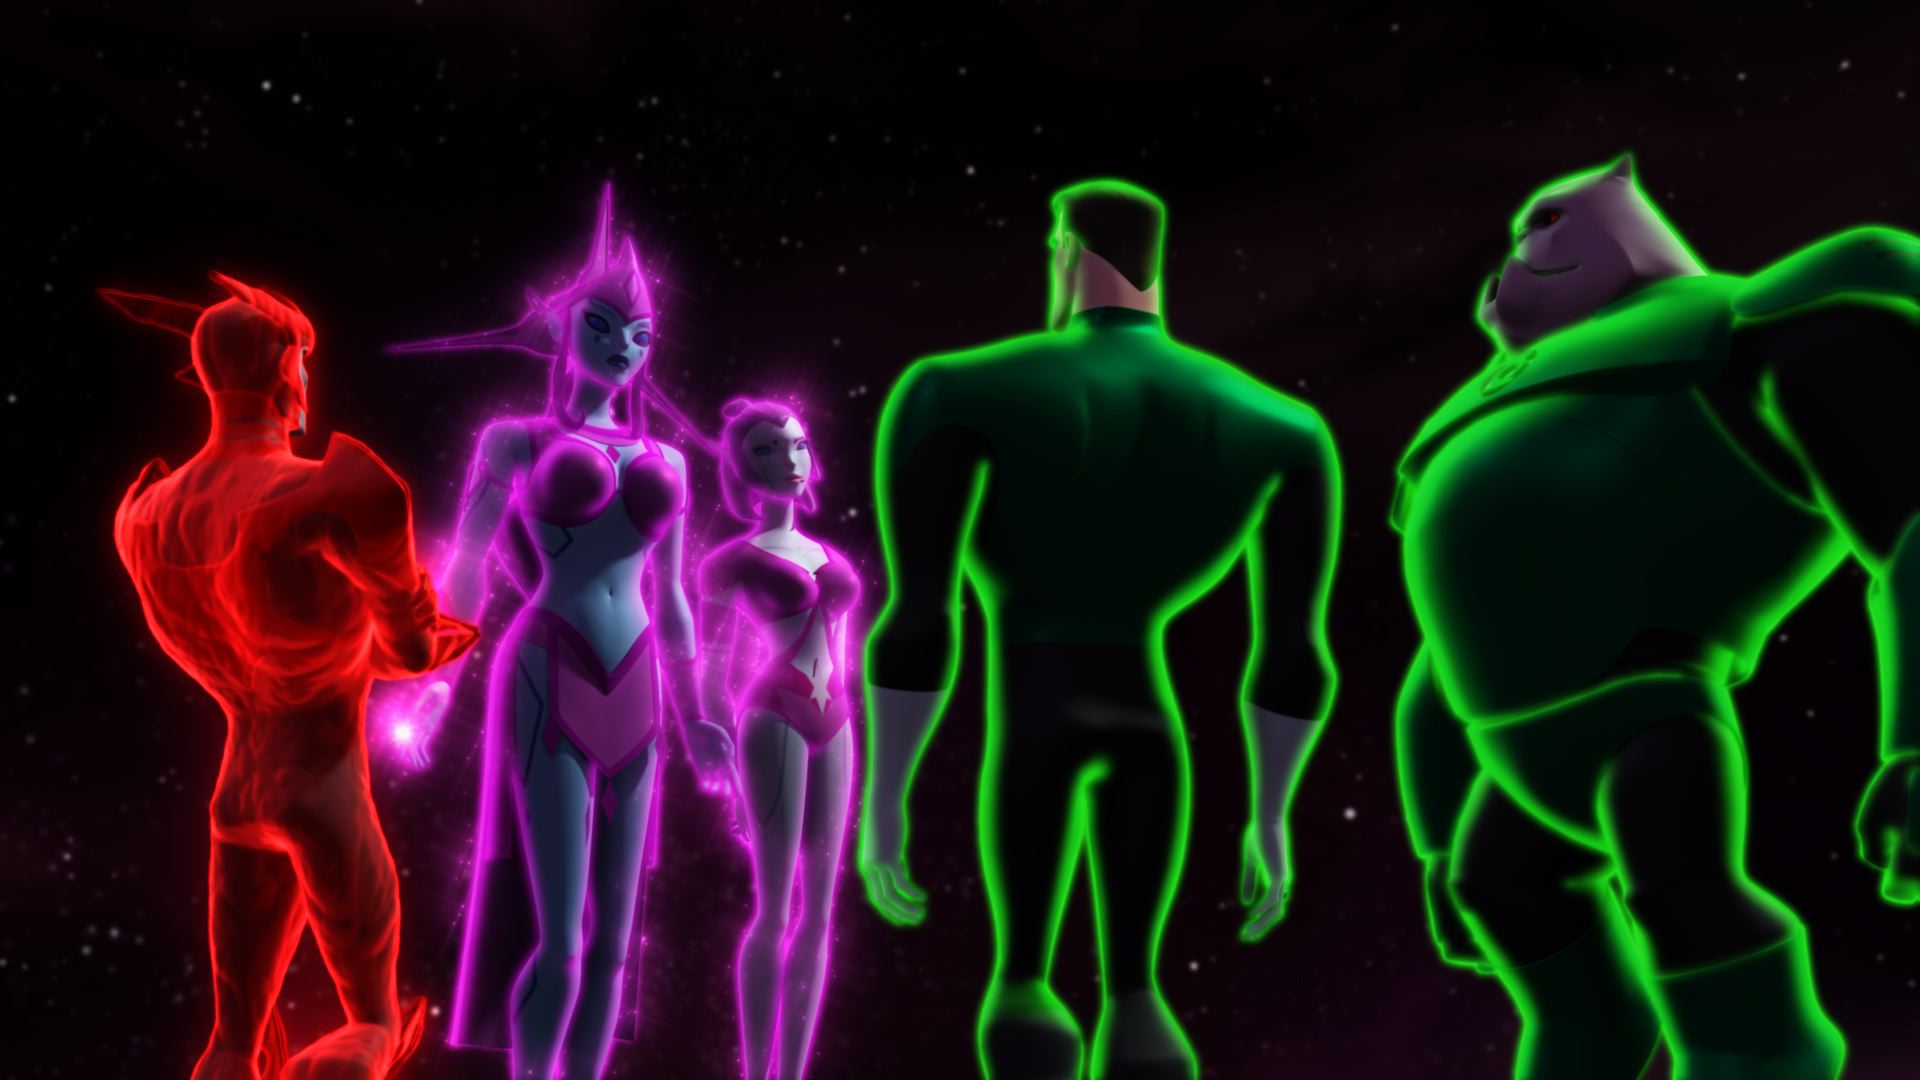 Star Sapphire Corps screenshots, image and pictures.